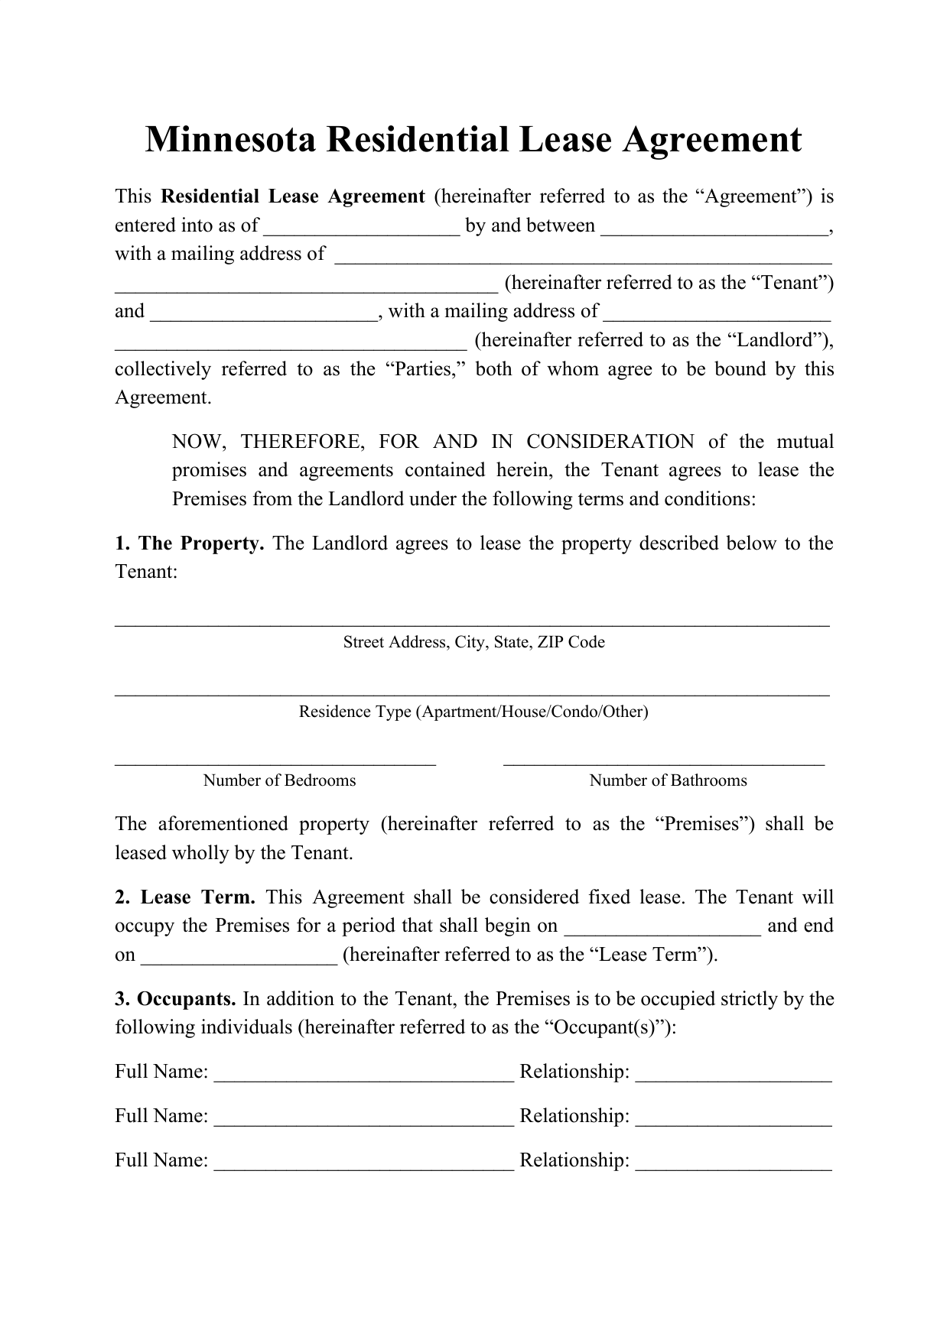 minnesota-residential-lease-agreement-template-download-printable-pdf